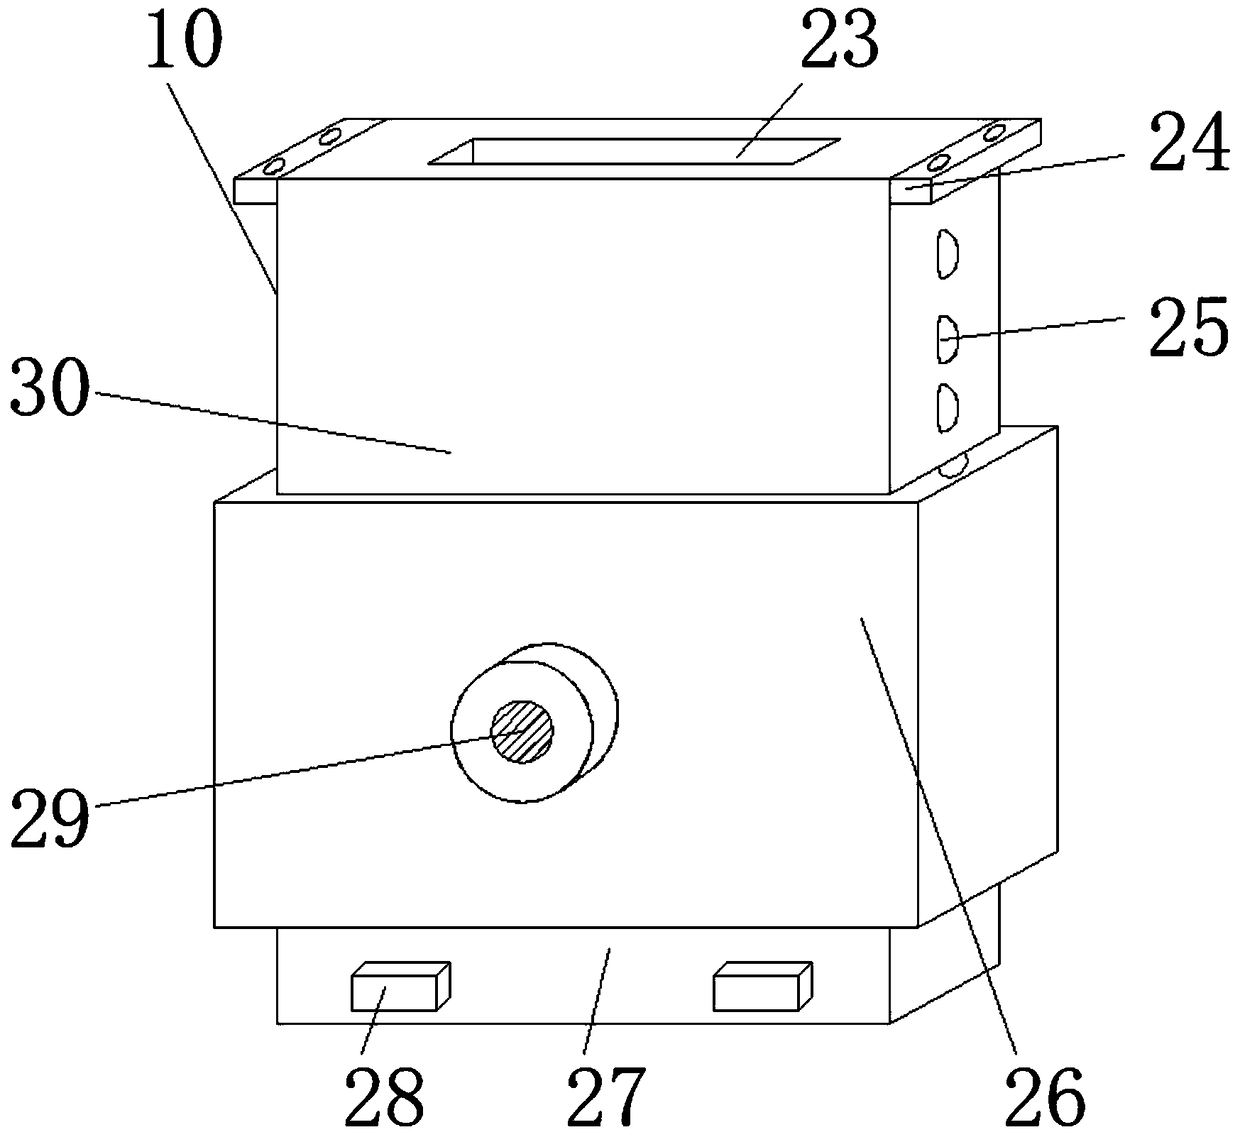 Novel multifunctional environmental garbage can and its use method